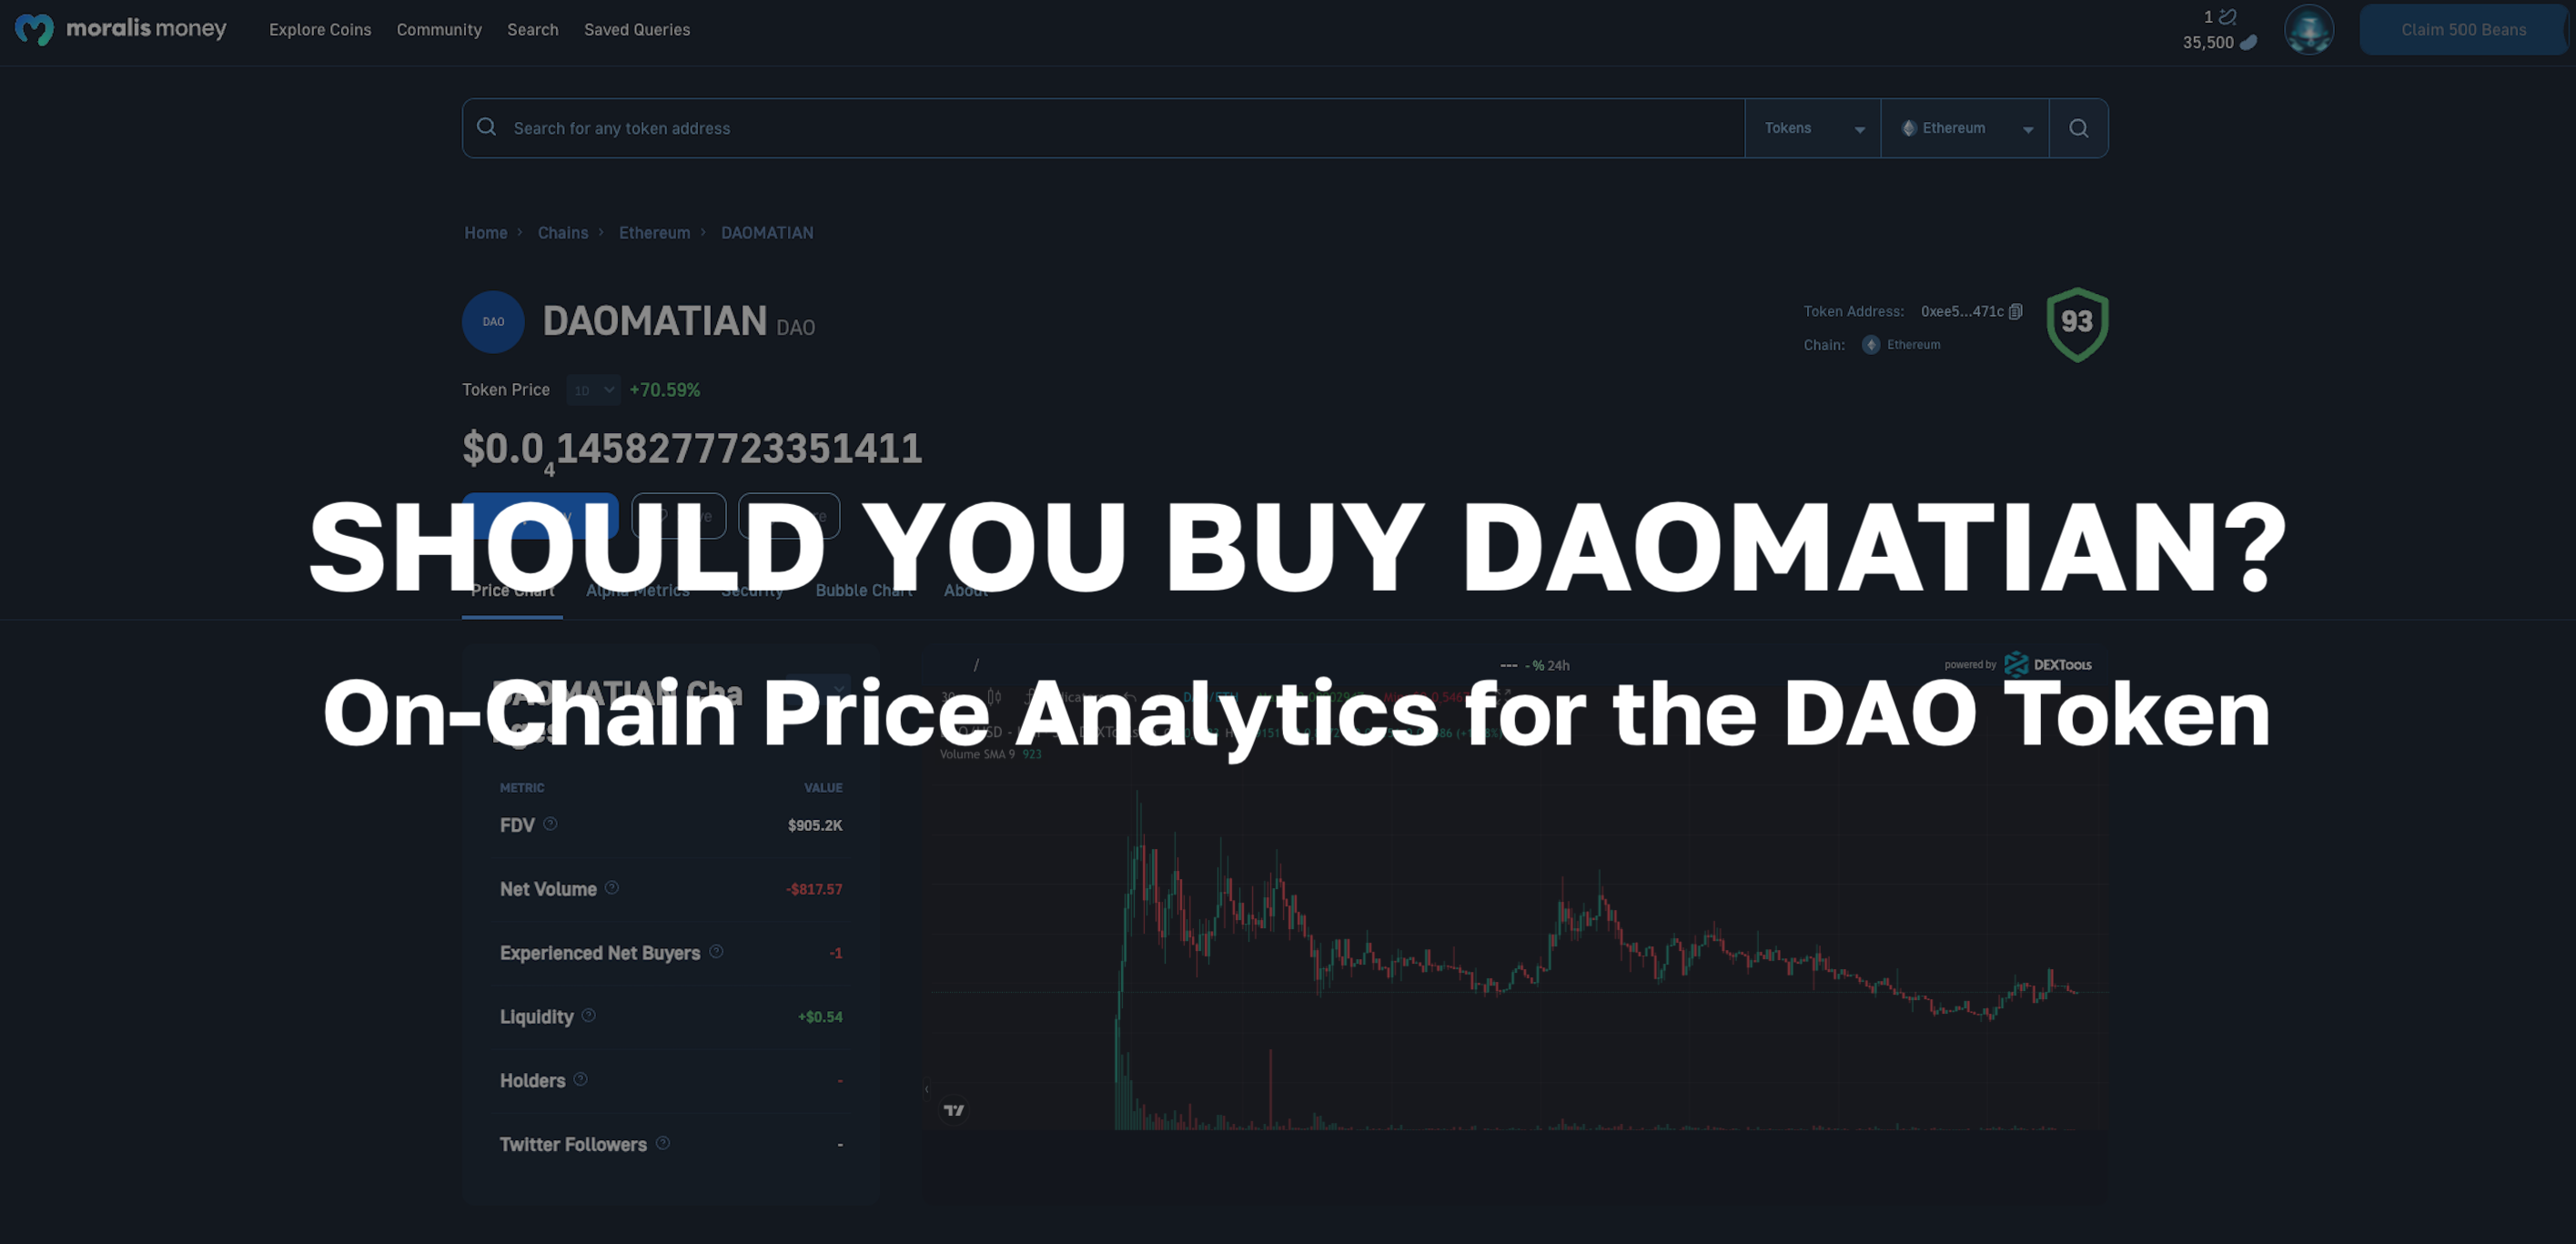 Should You Buy Daomatian? On-Chain Price Analytics for the DAO Token